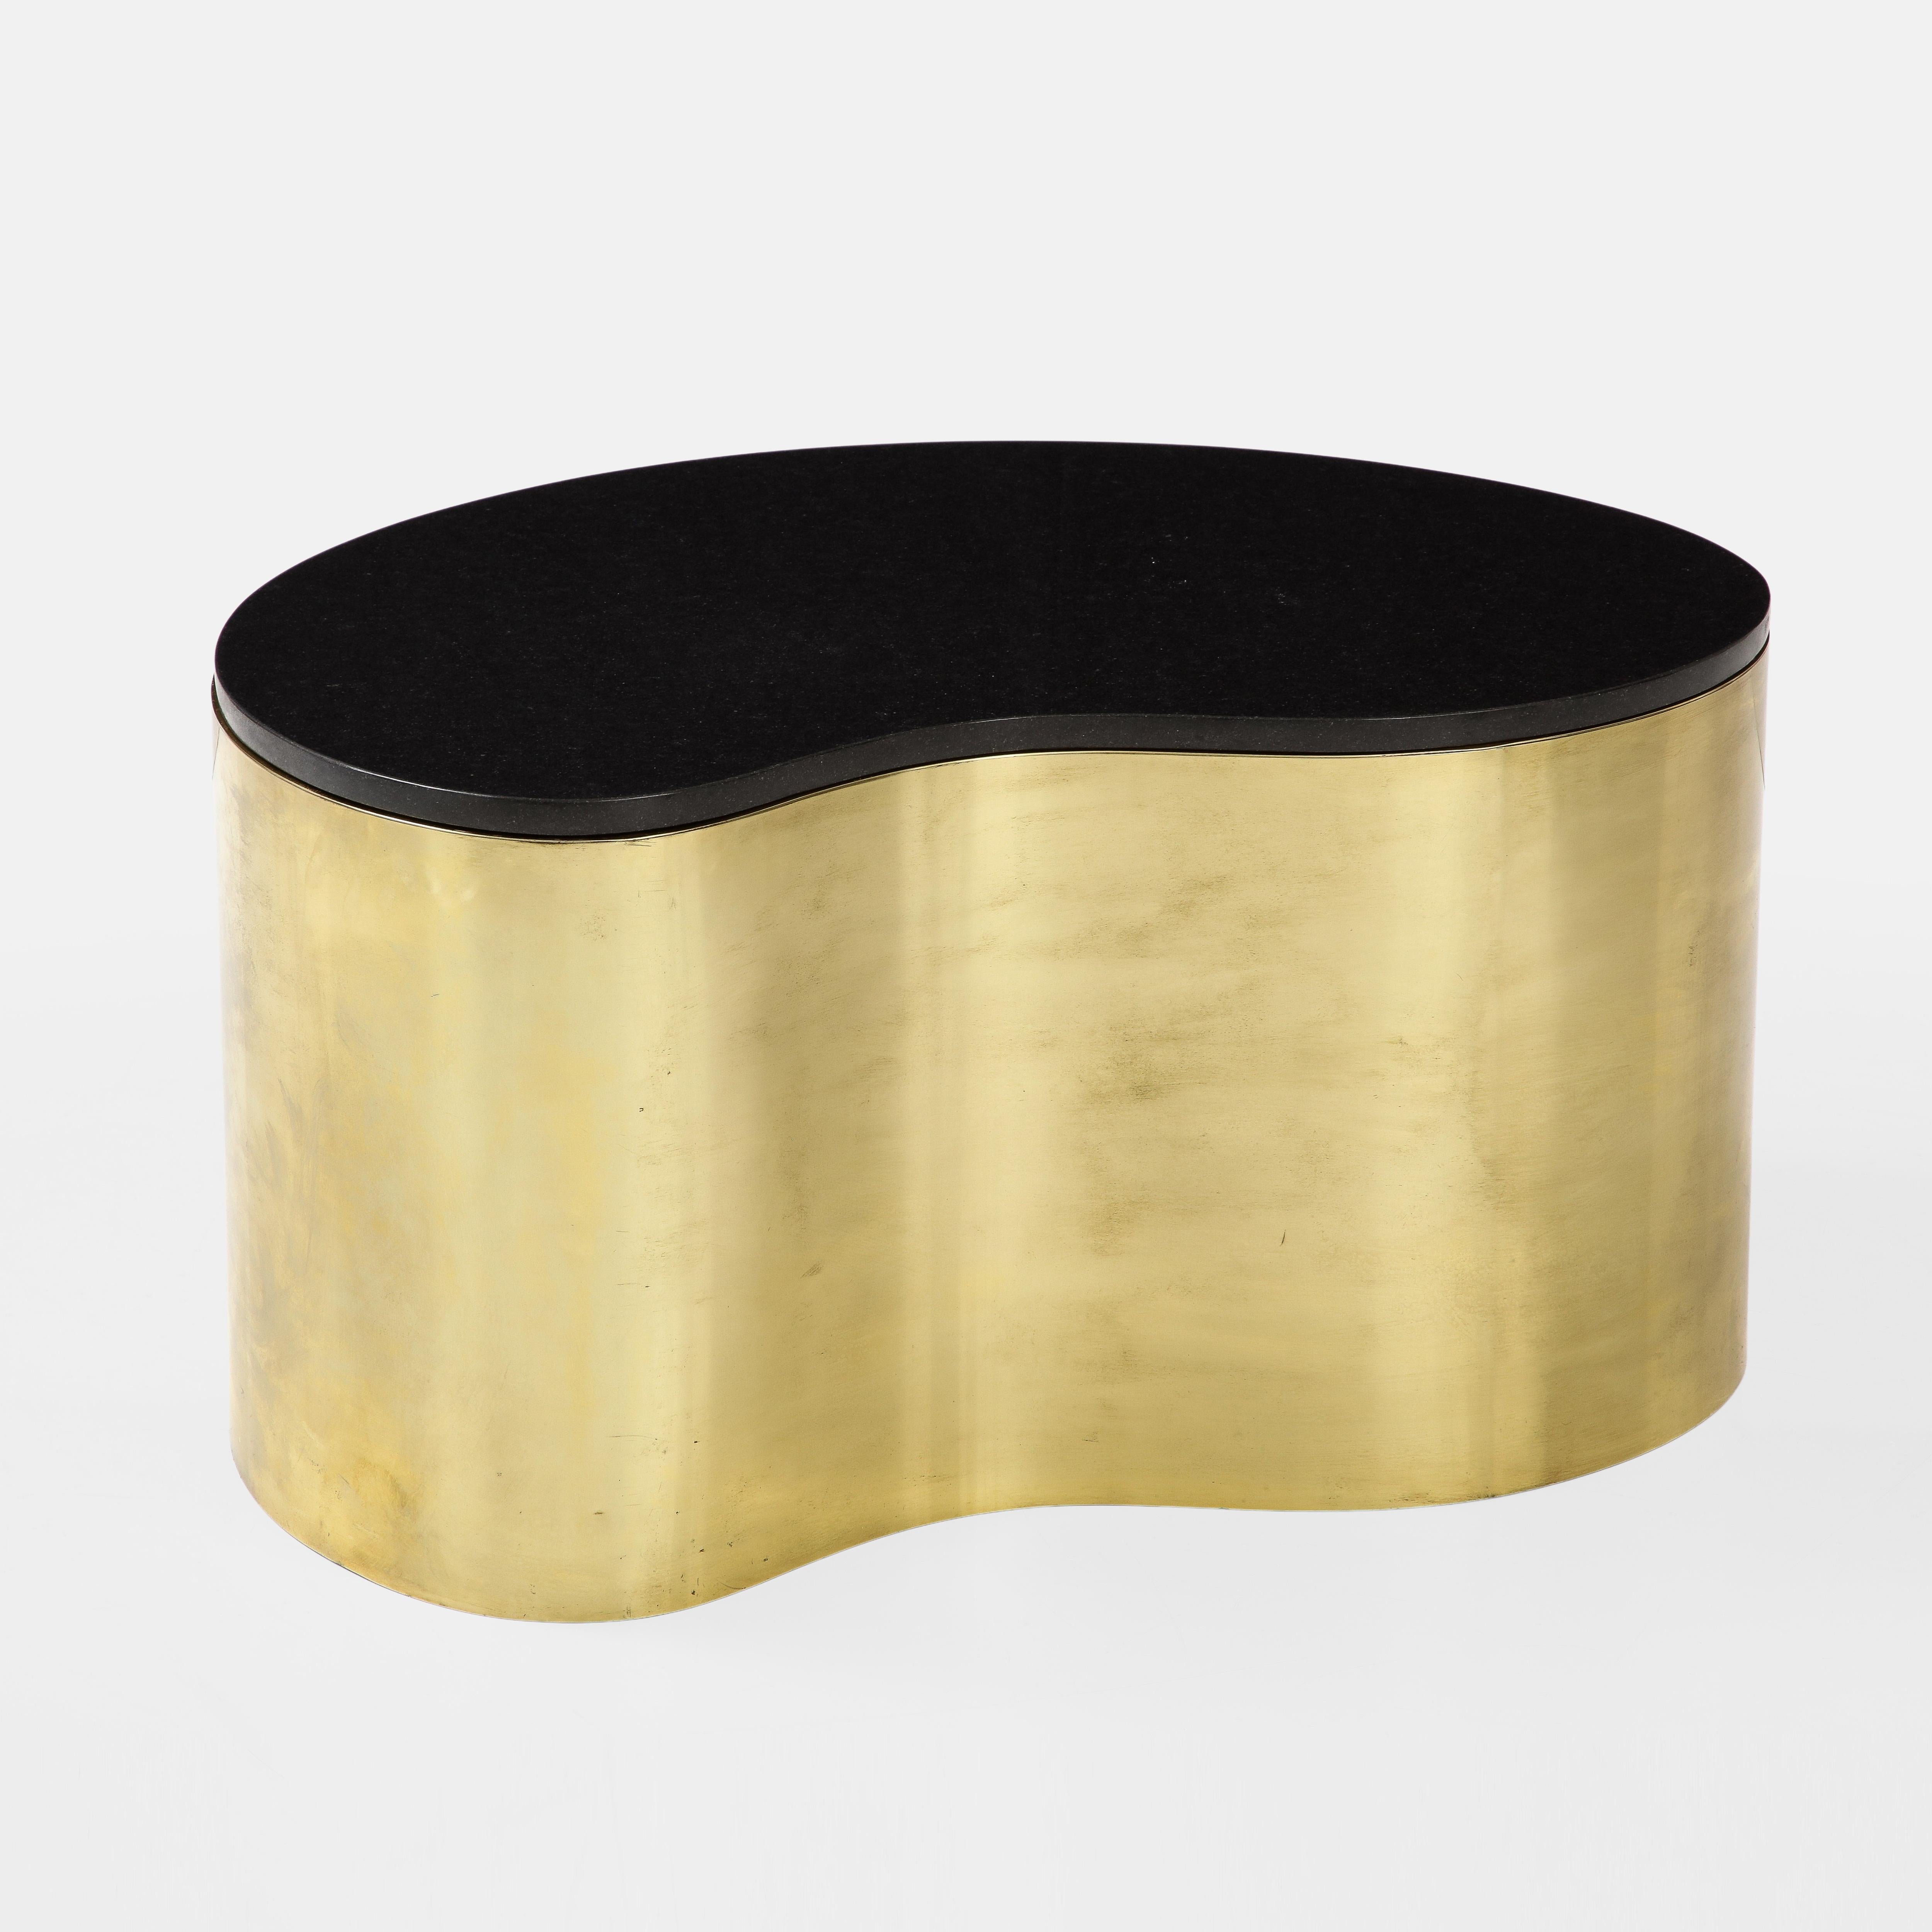 Karl Springer Freeform Coffee Table in Brass and Granite, 1970s For Sale 3